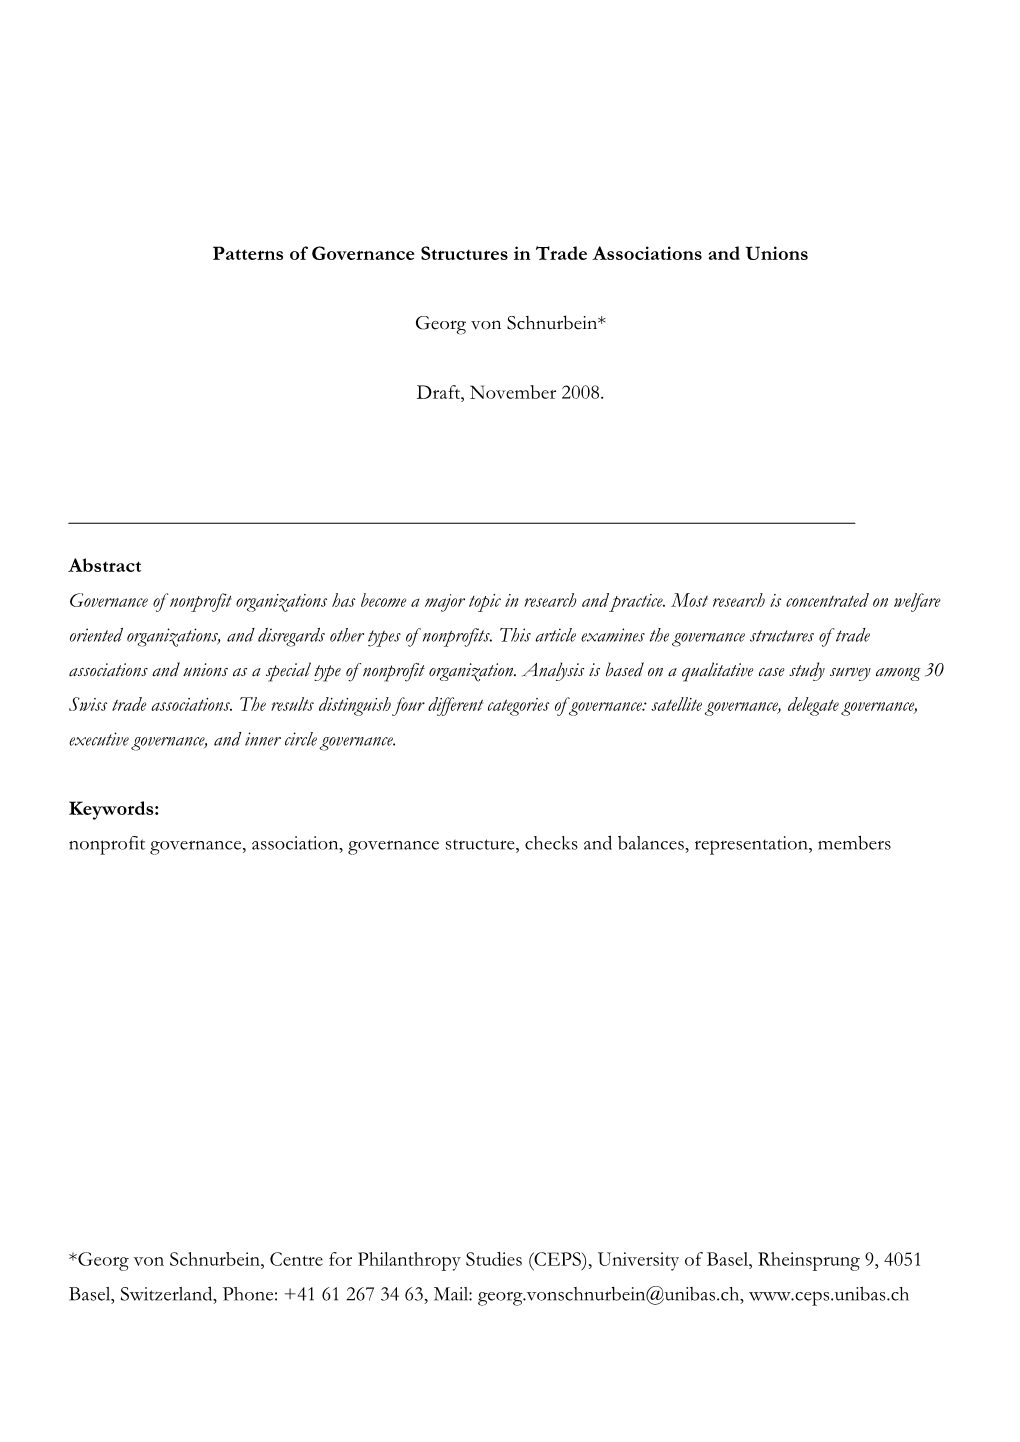 Patterns of Governance Structures in Trade Associations and Unions